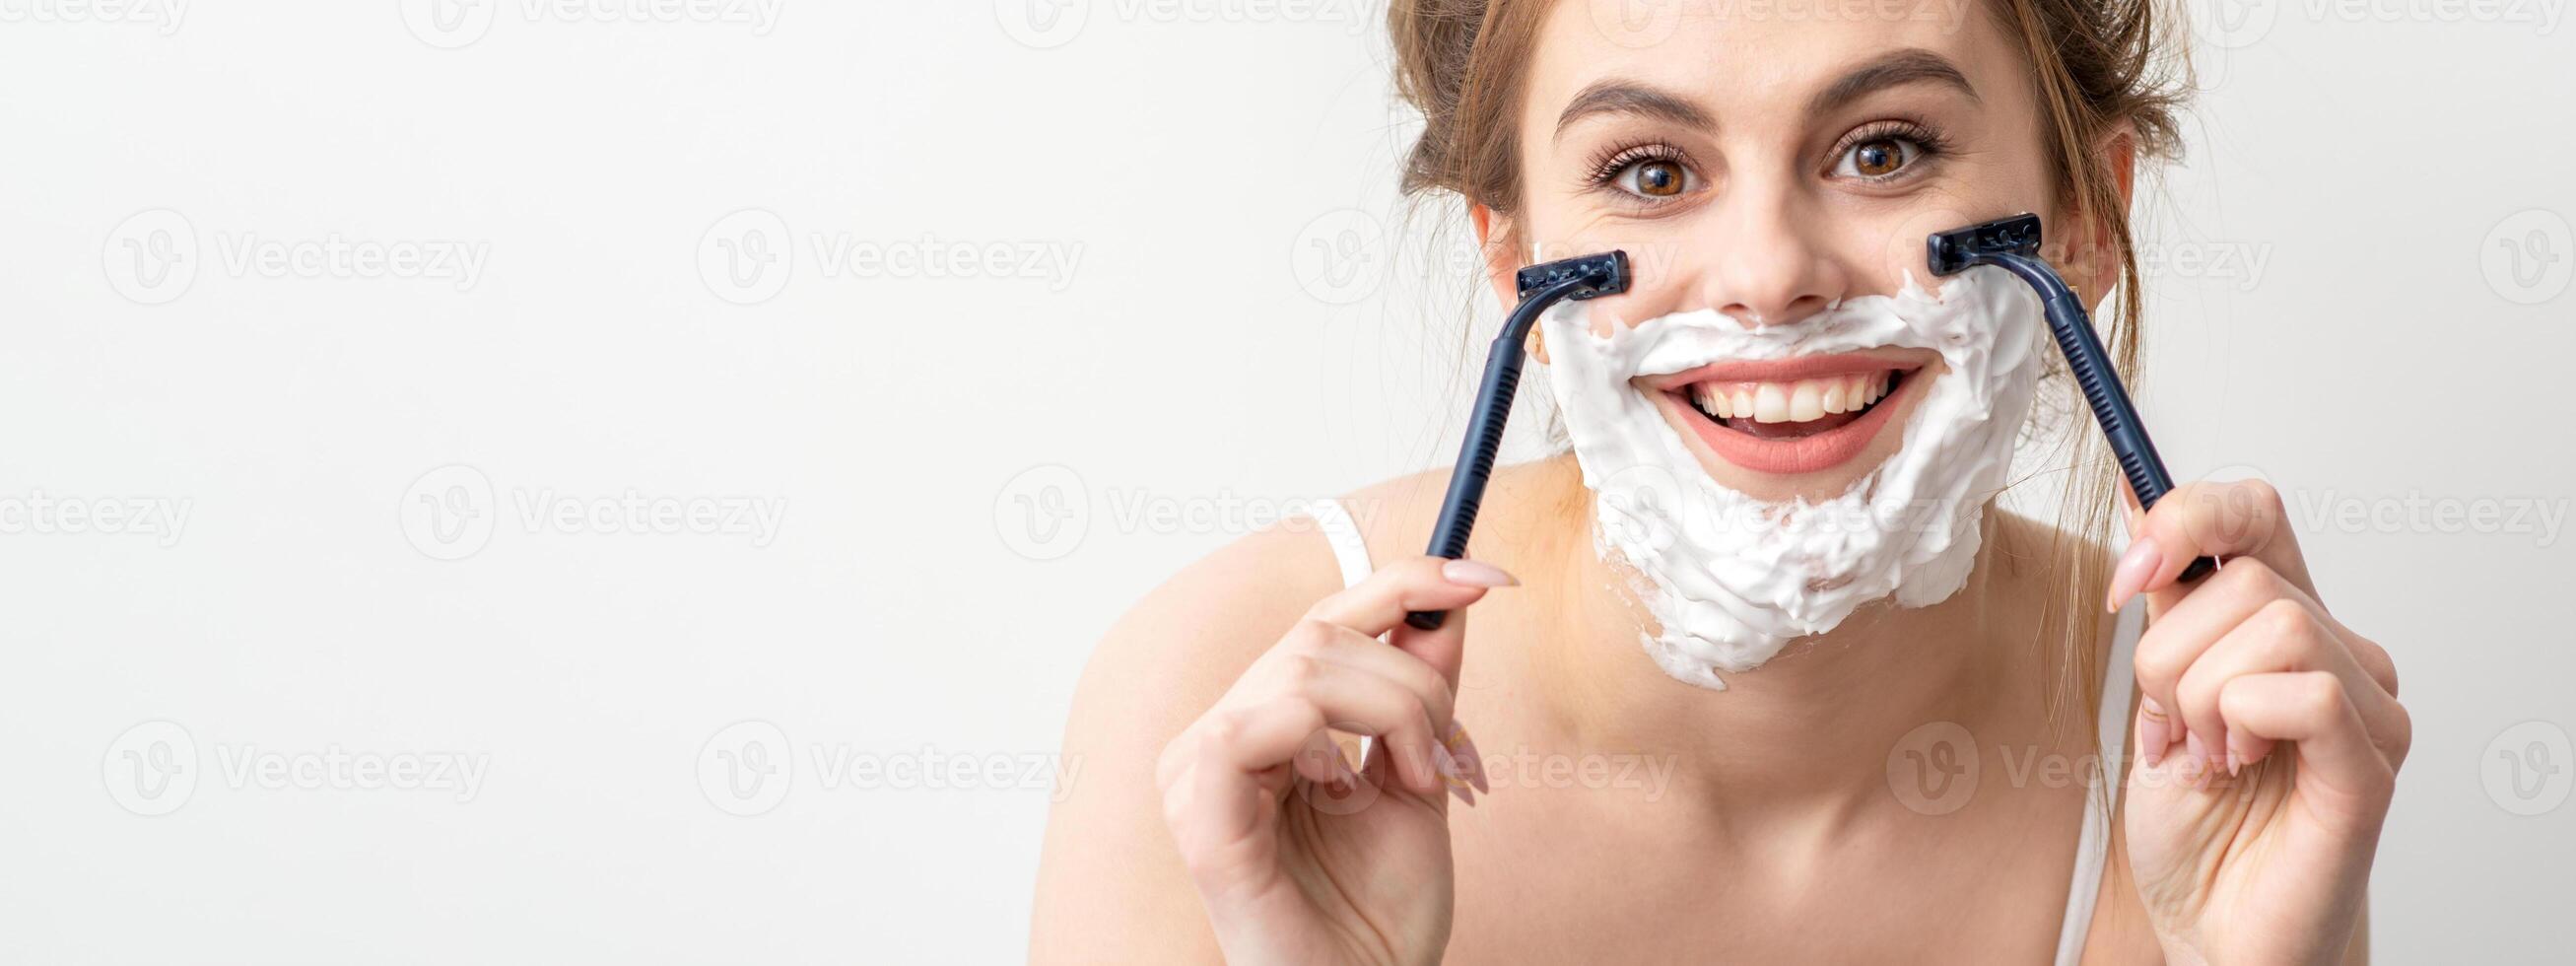 Beautiful young caucasian woman shaving her face by razor on white background. Pretty smiling woman with shaving foam and razor on her face. photo